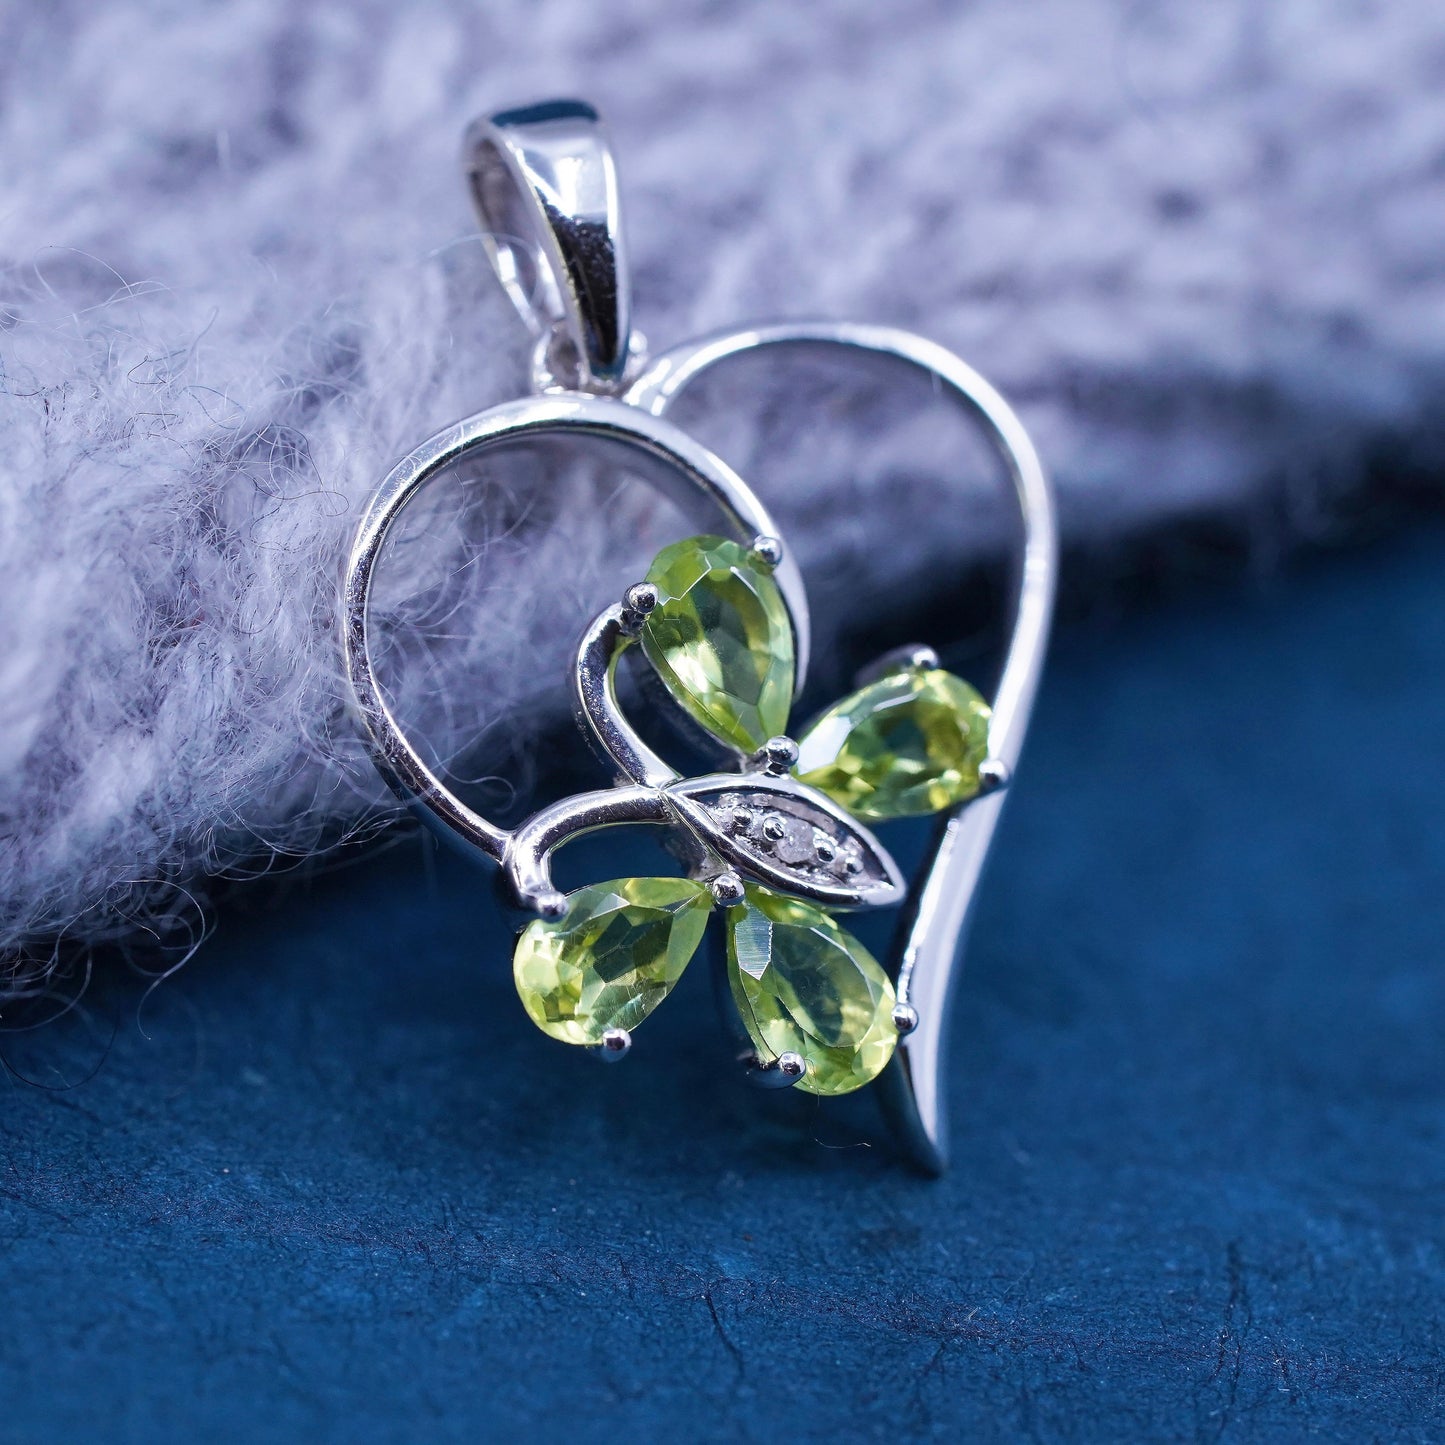 Vintage Sterling 925 silver handmade butterfly heart pendant with green peridot